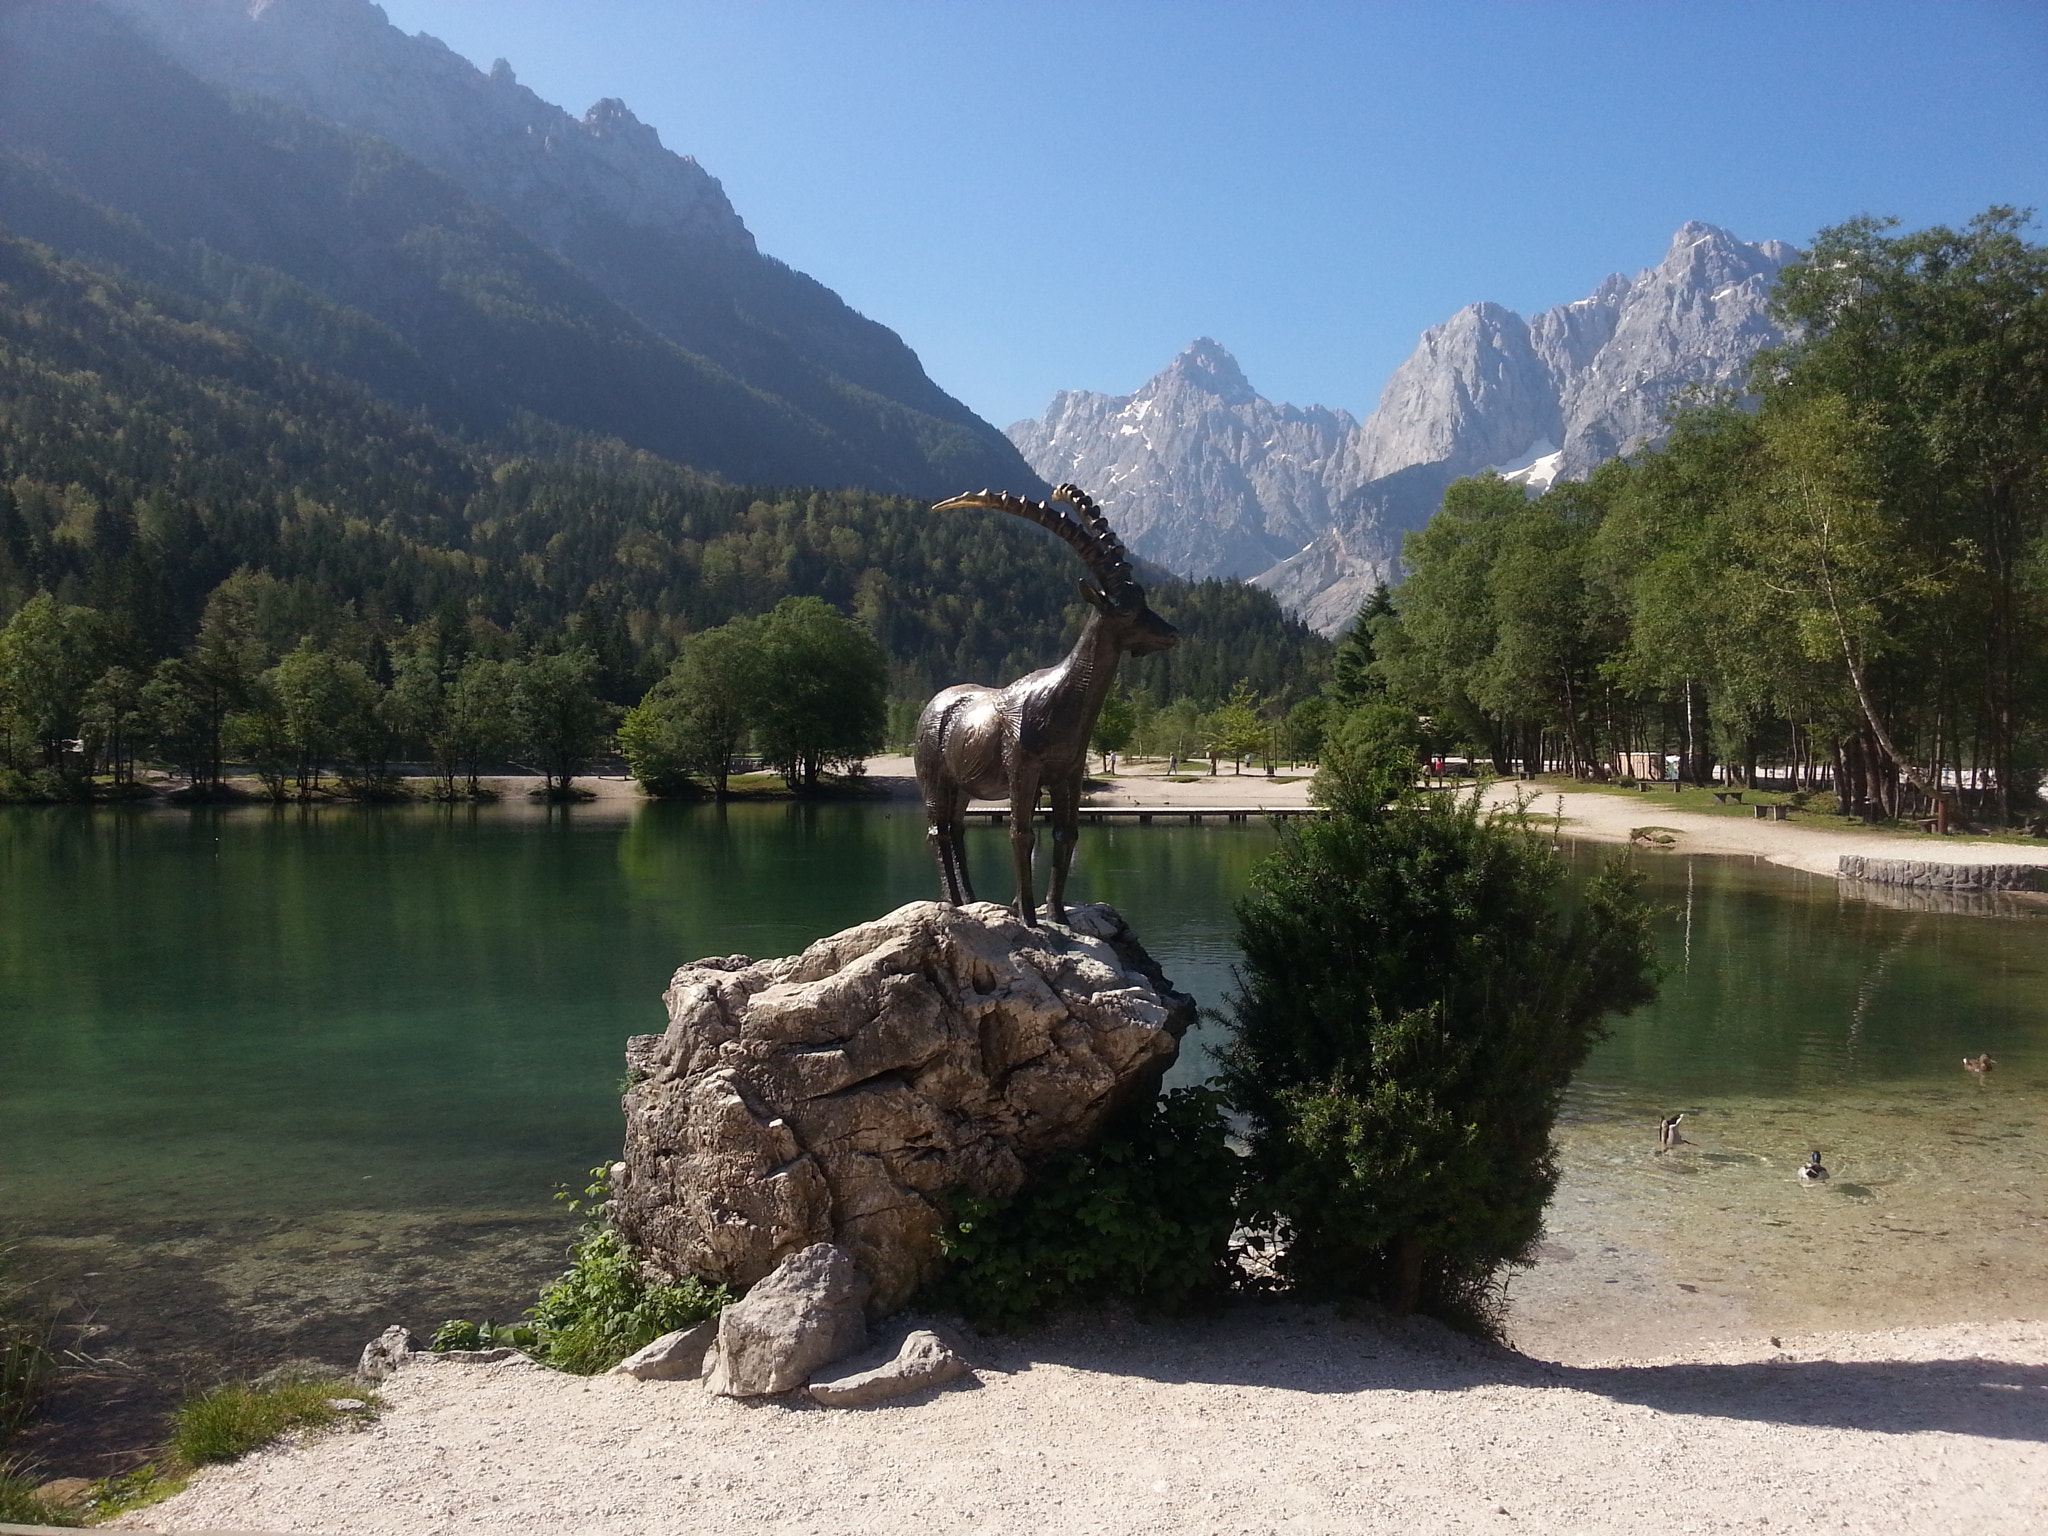 Samsung GT-I8750 sample photo. Goat statue at bled lake photography